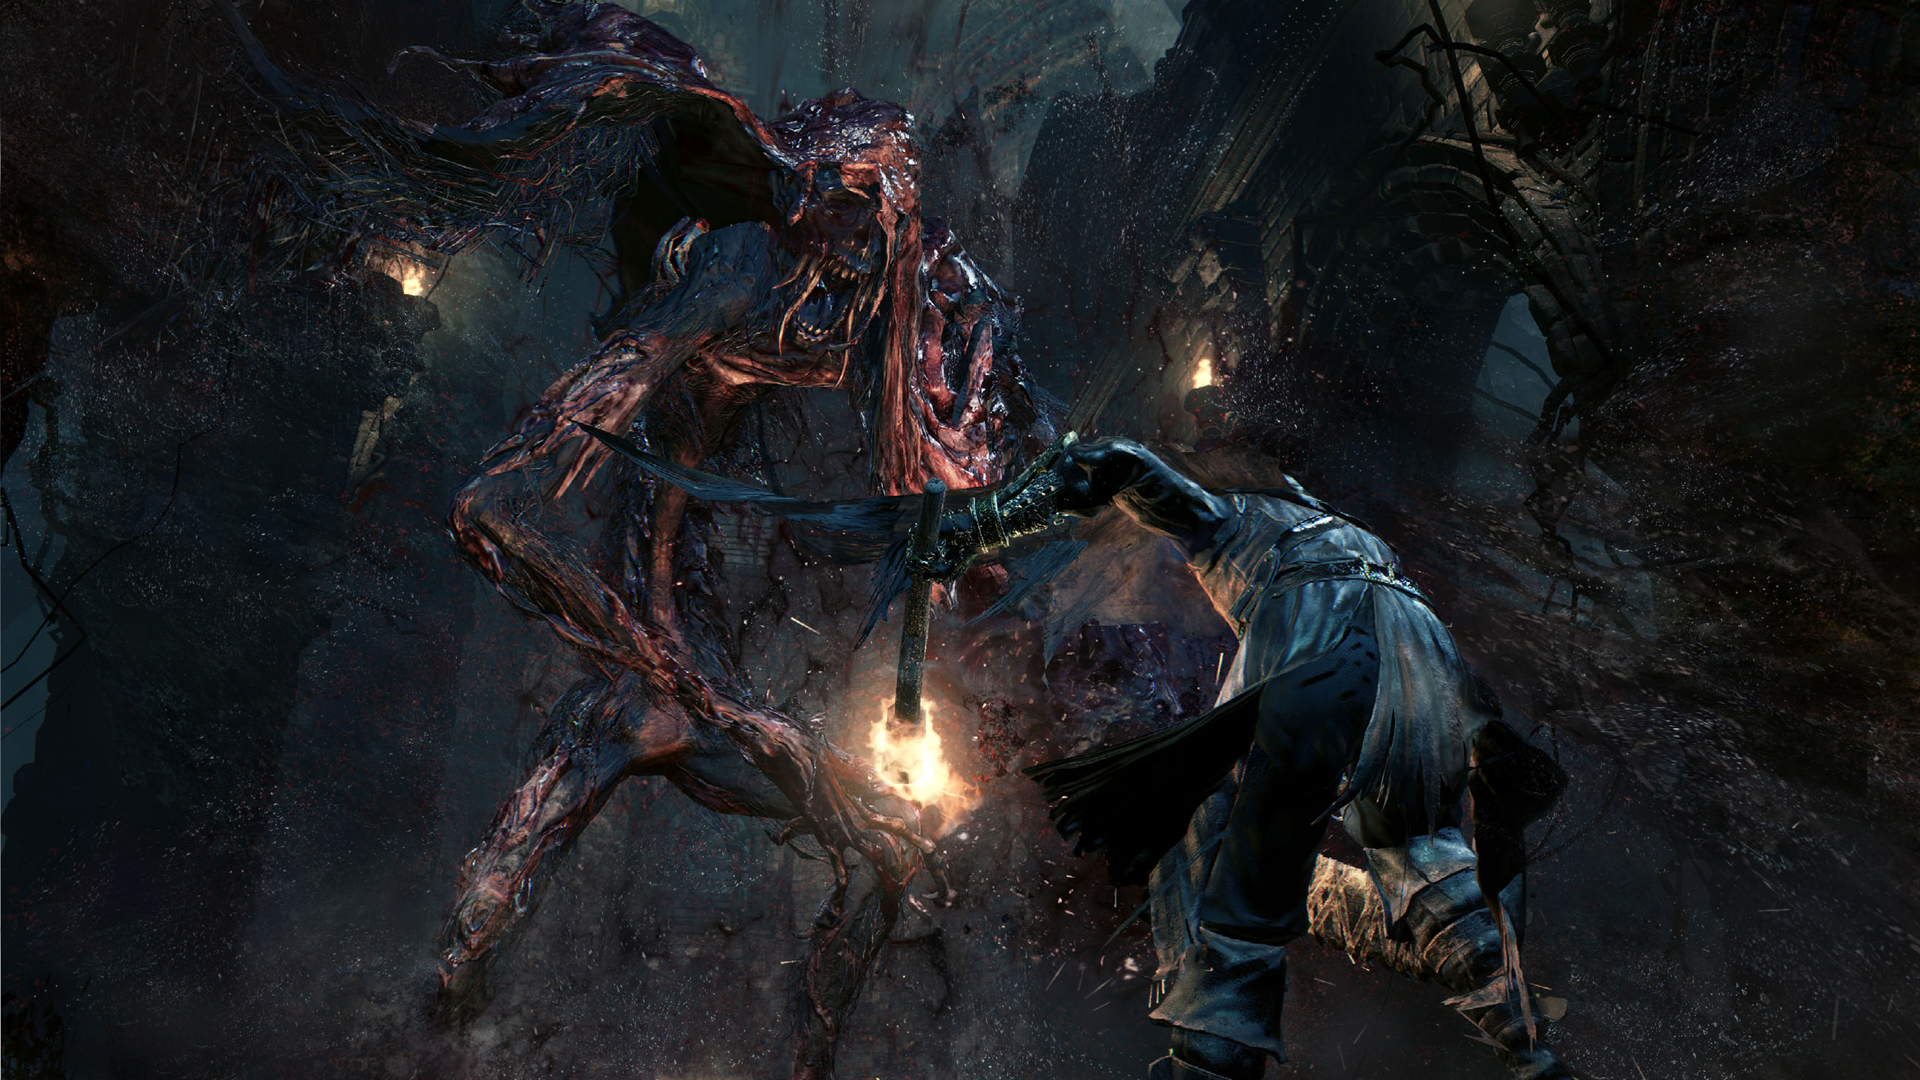 The blood starved beast is a creature that would thrive in Silent Hill just as much as it does in Yharnam.